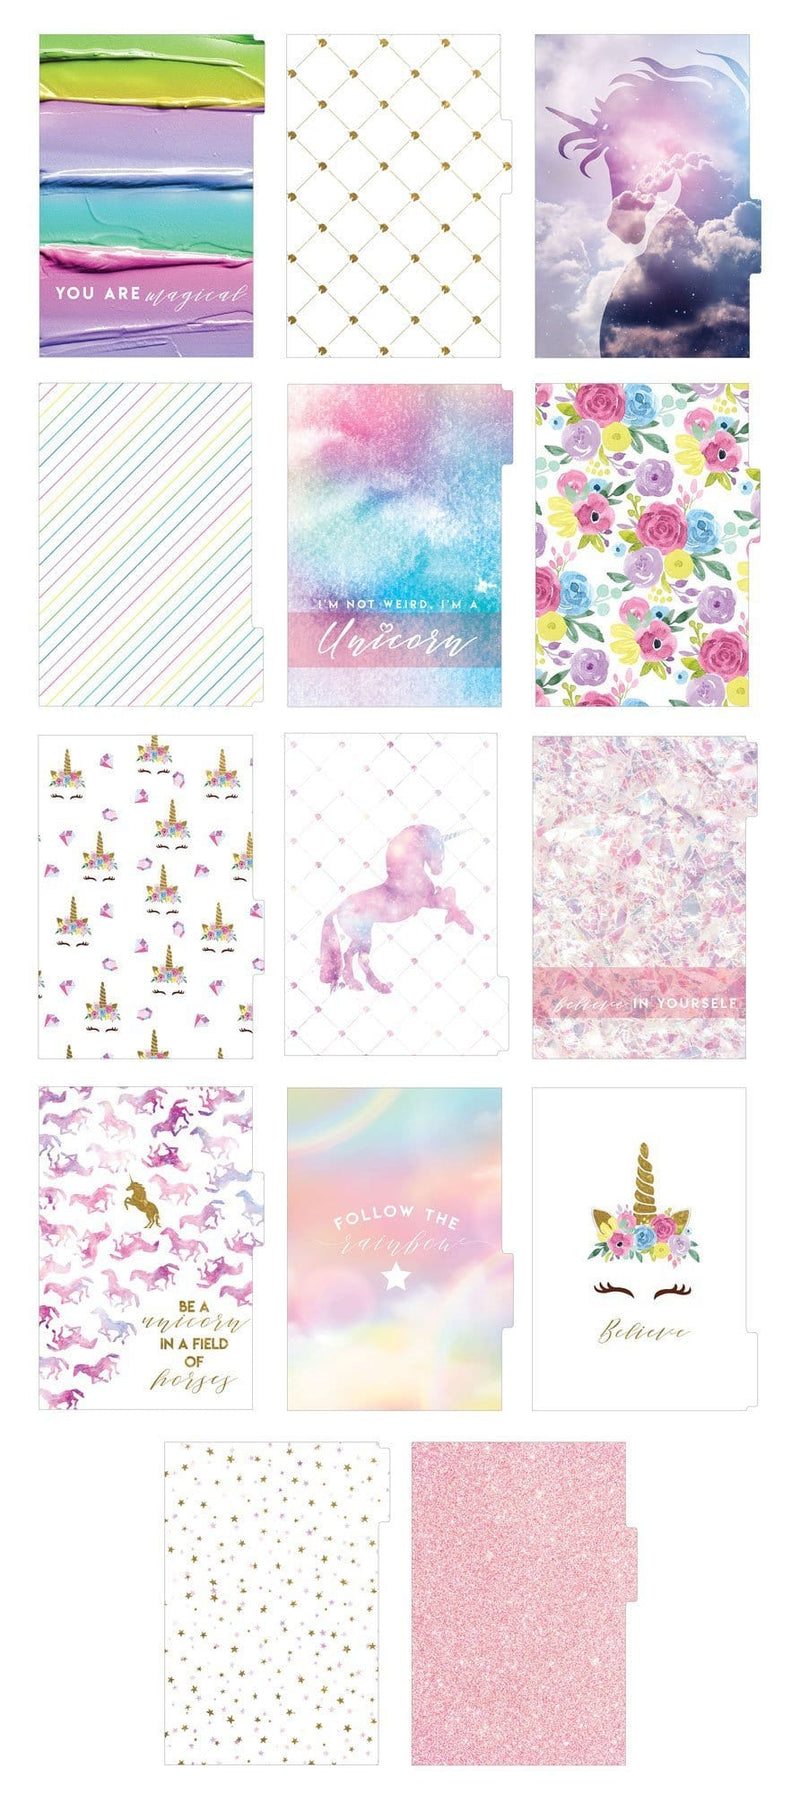 Student mini academic planner image showing fourteen dividers featuring unicorns and patterns.